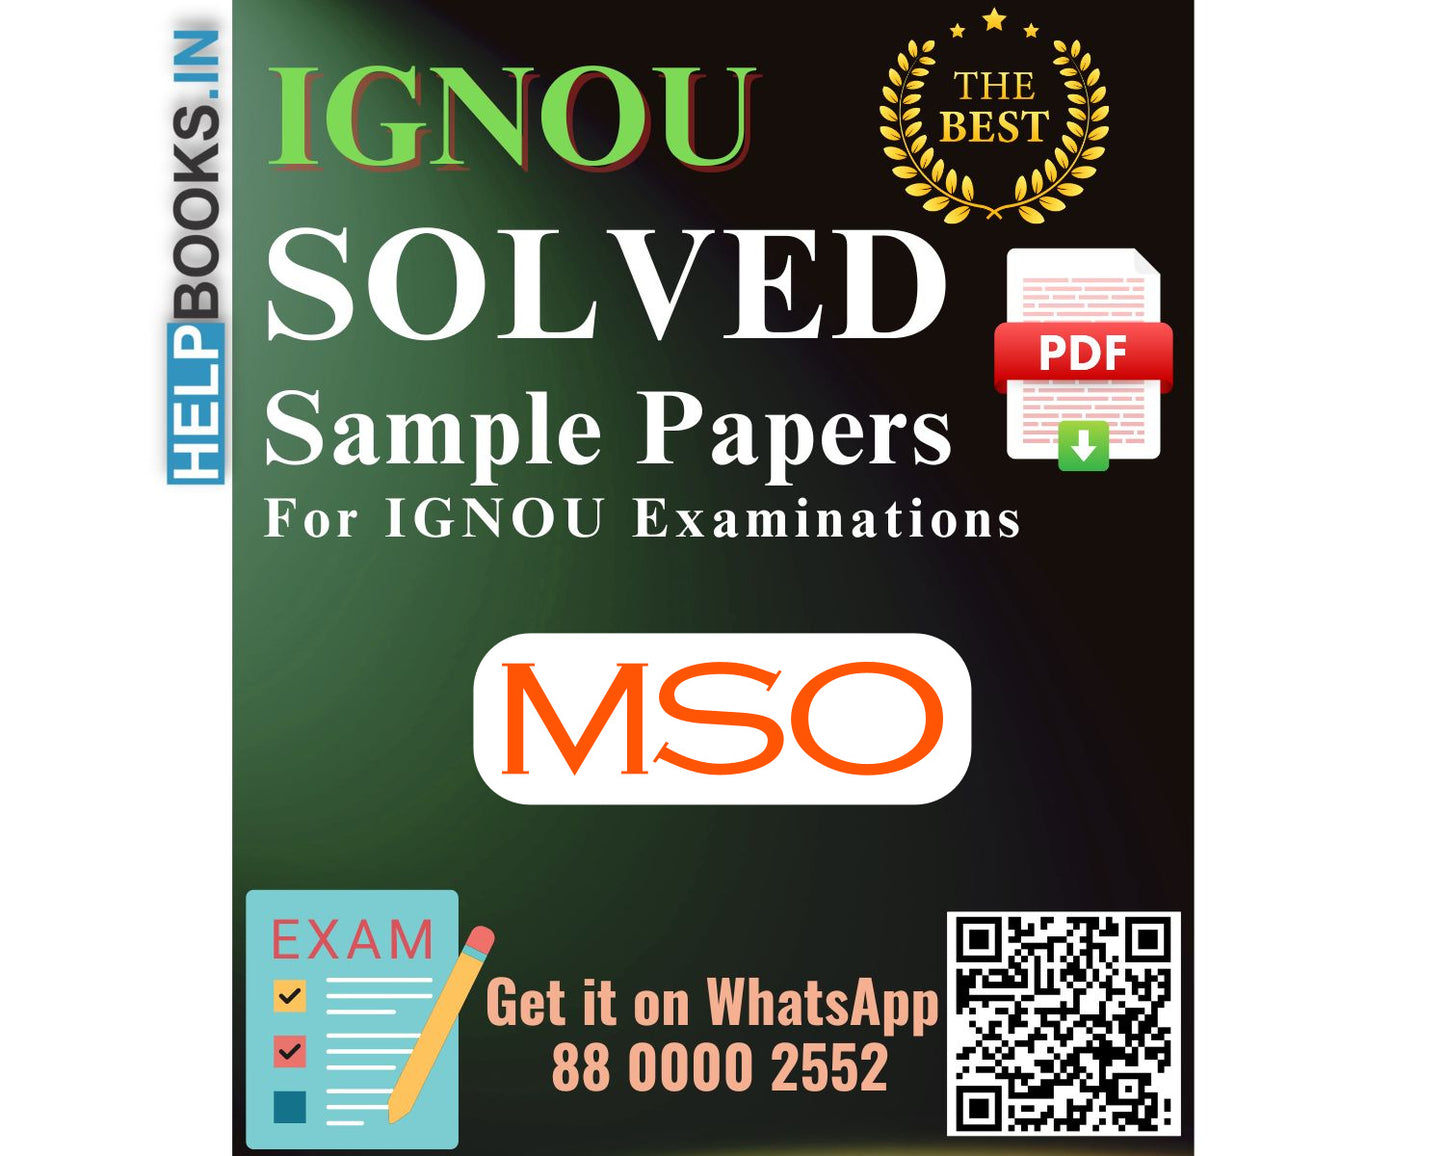 IGNOU Master of Arts (Sociology) (MSO) | Solved Sample Papers for Exams